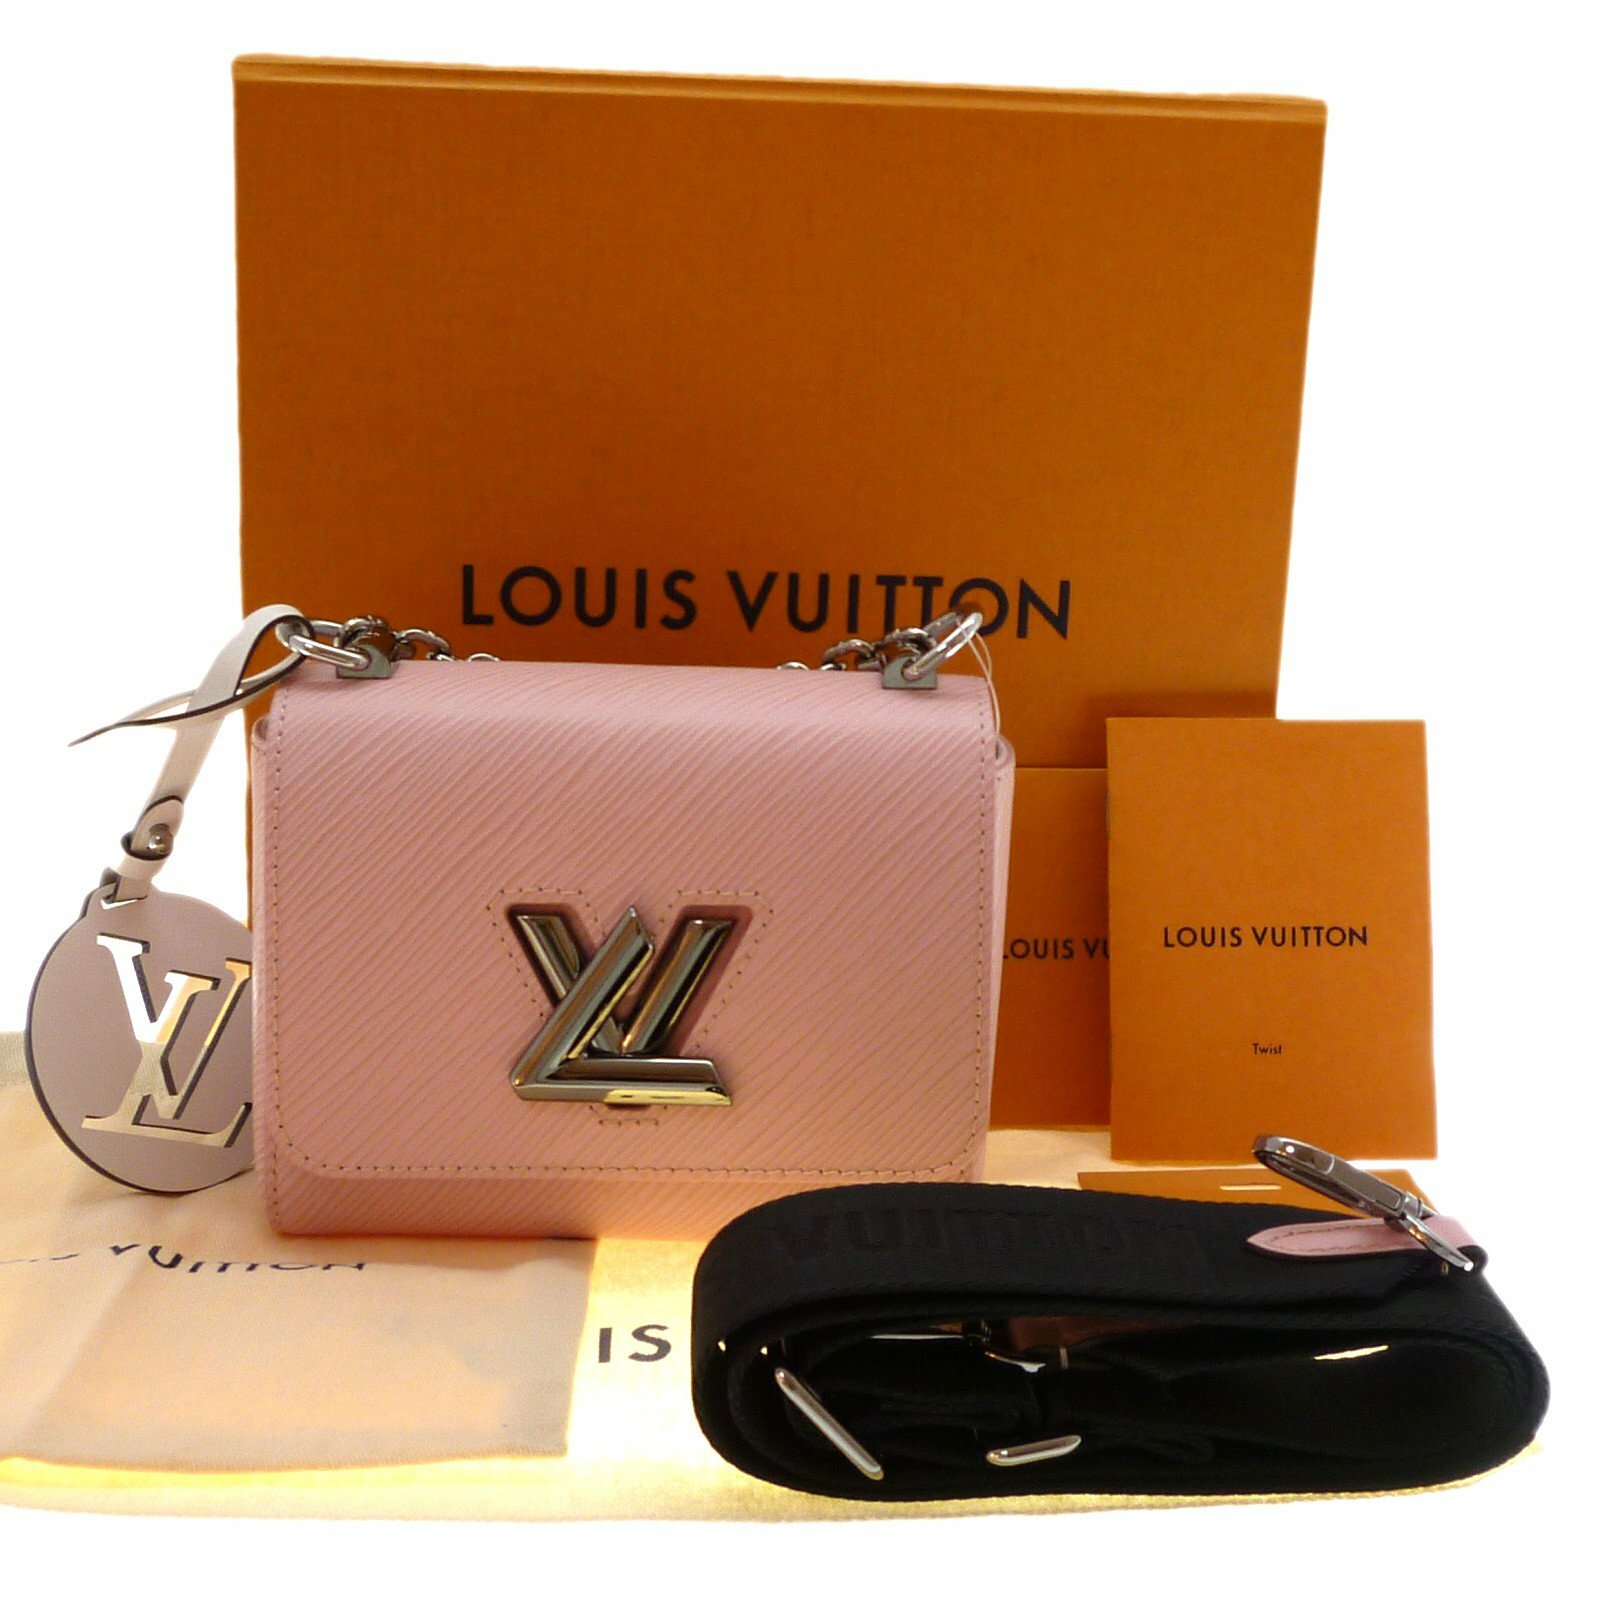 Compact twist mini Louis Vuitton in bright pink and a matching